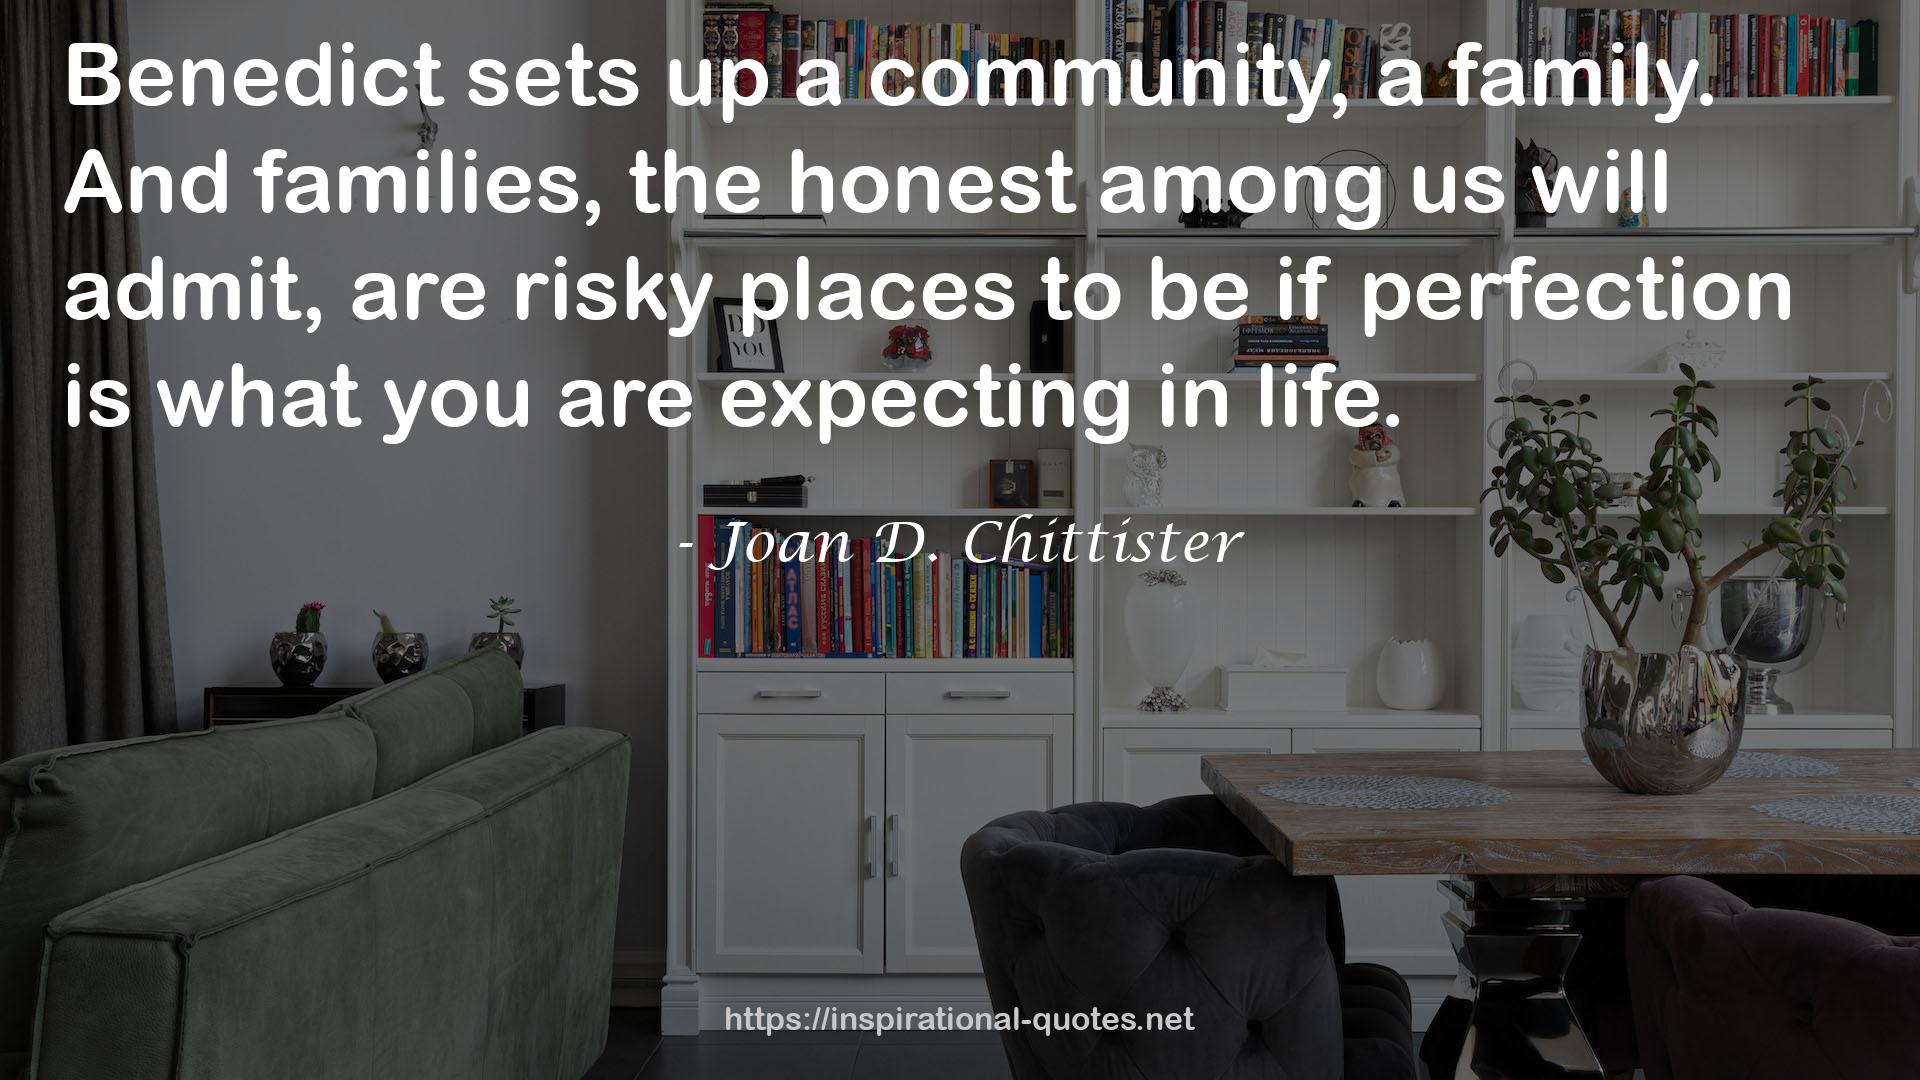 Joan D. Chittister QUOTES